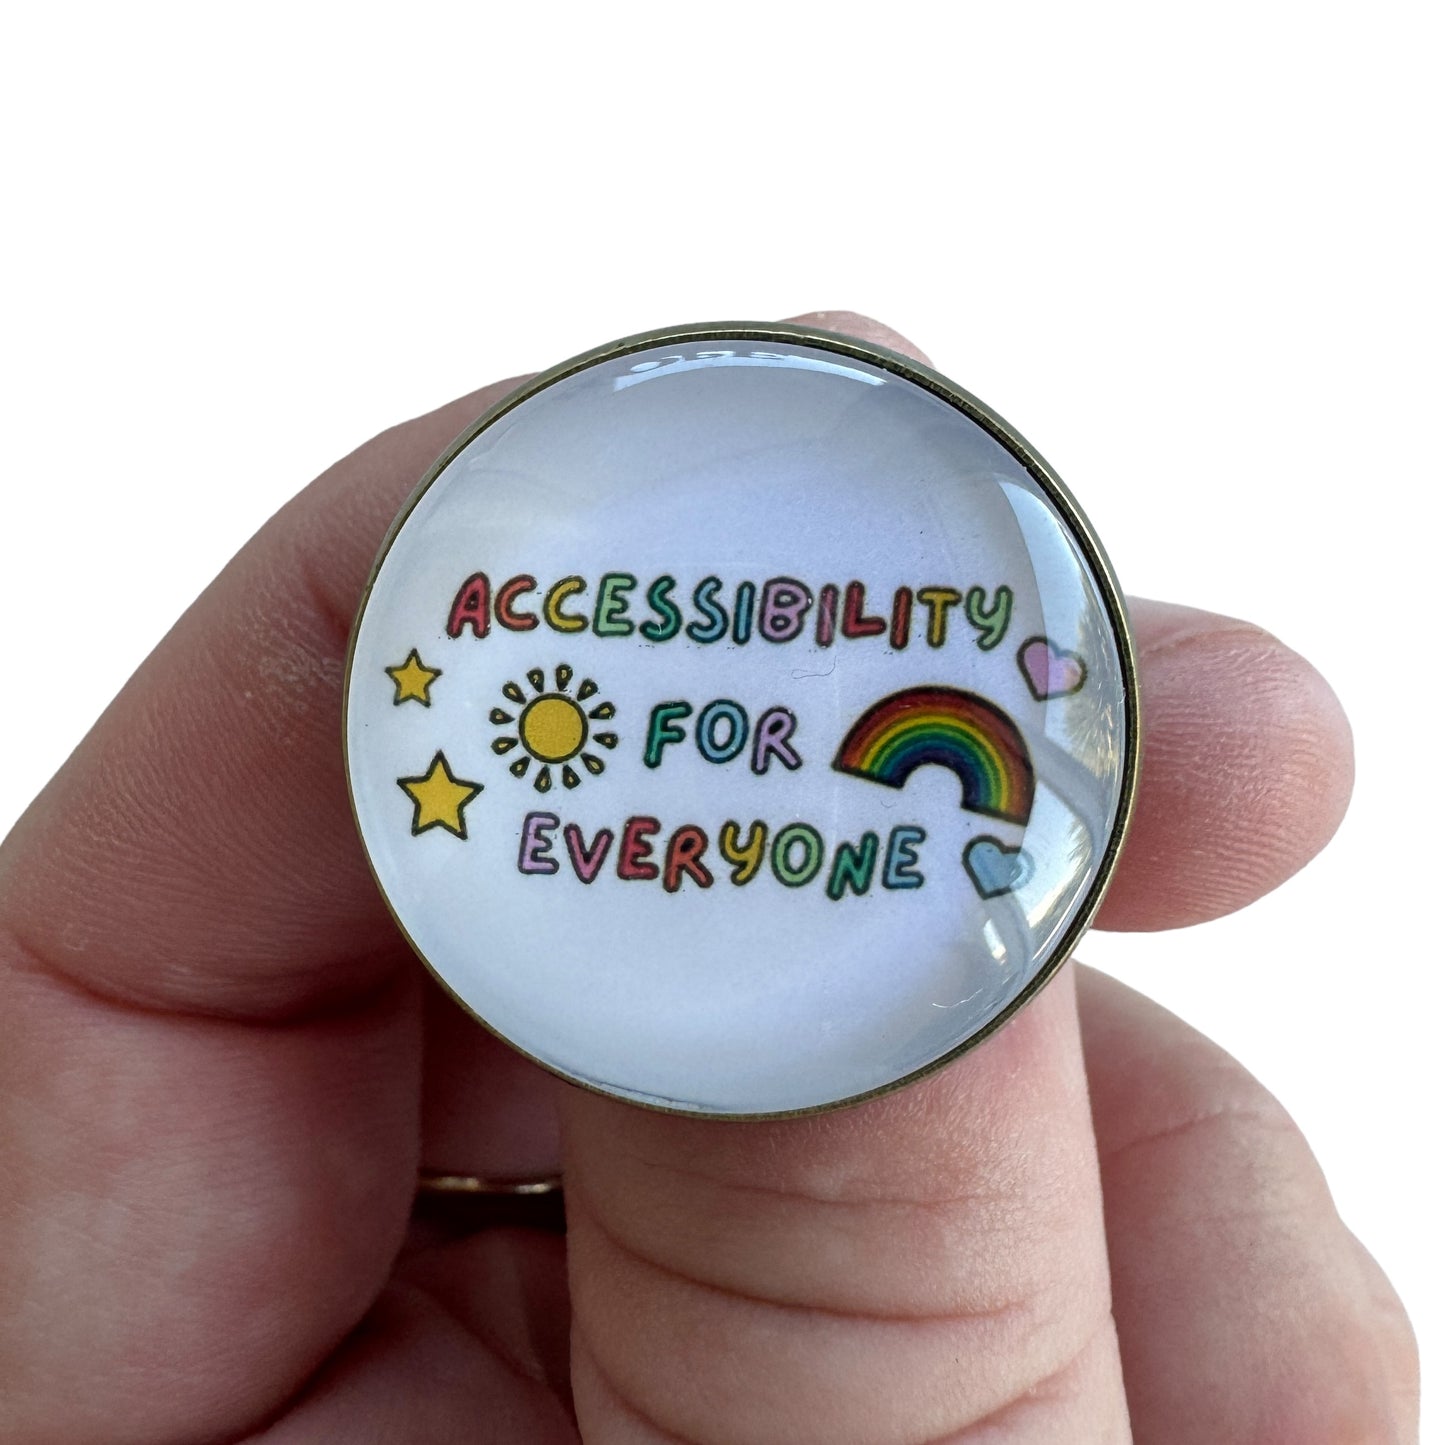 Pin — 'Accessibility for everyone’